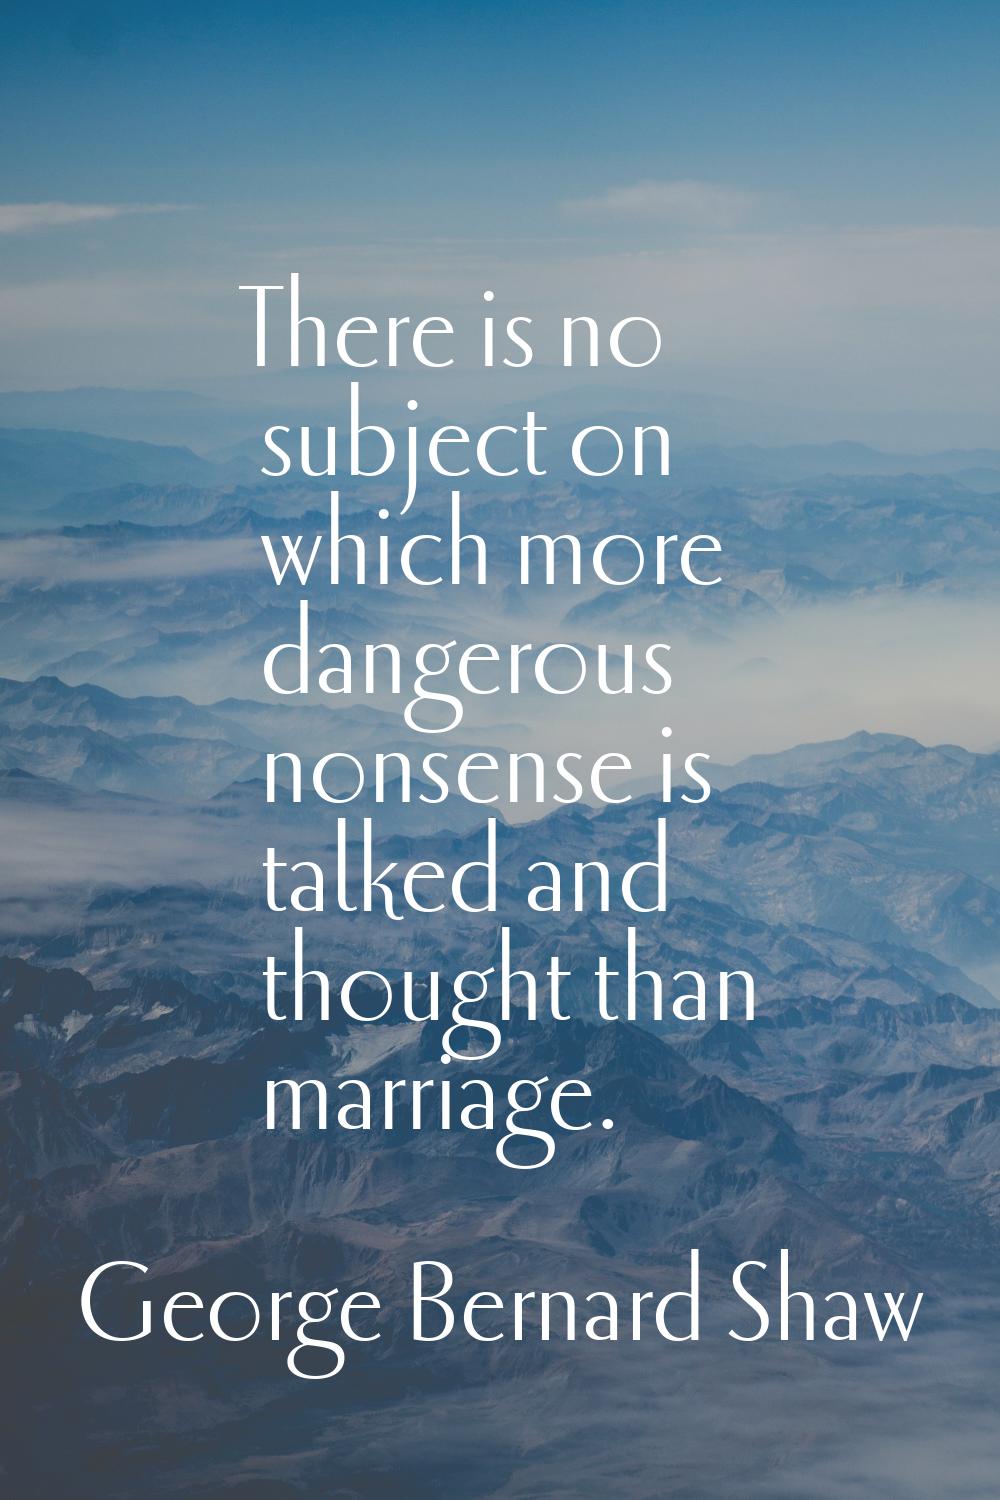 There is no subject on which more dangerous nonsense is talked and thought than marriage.